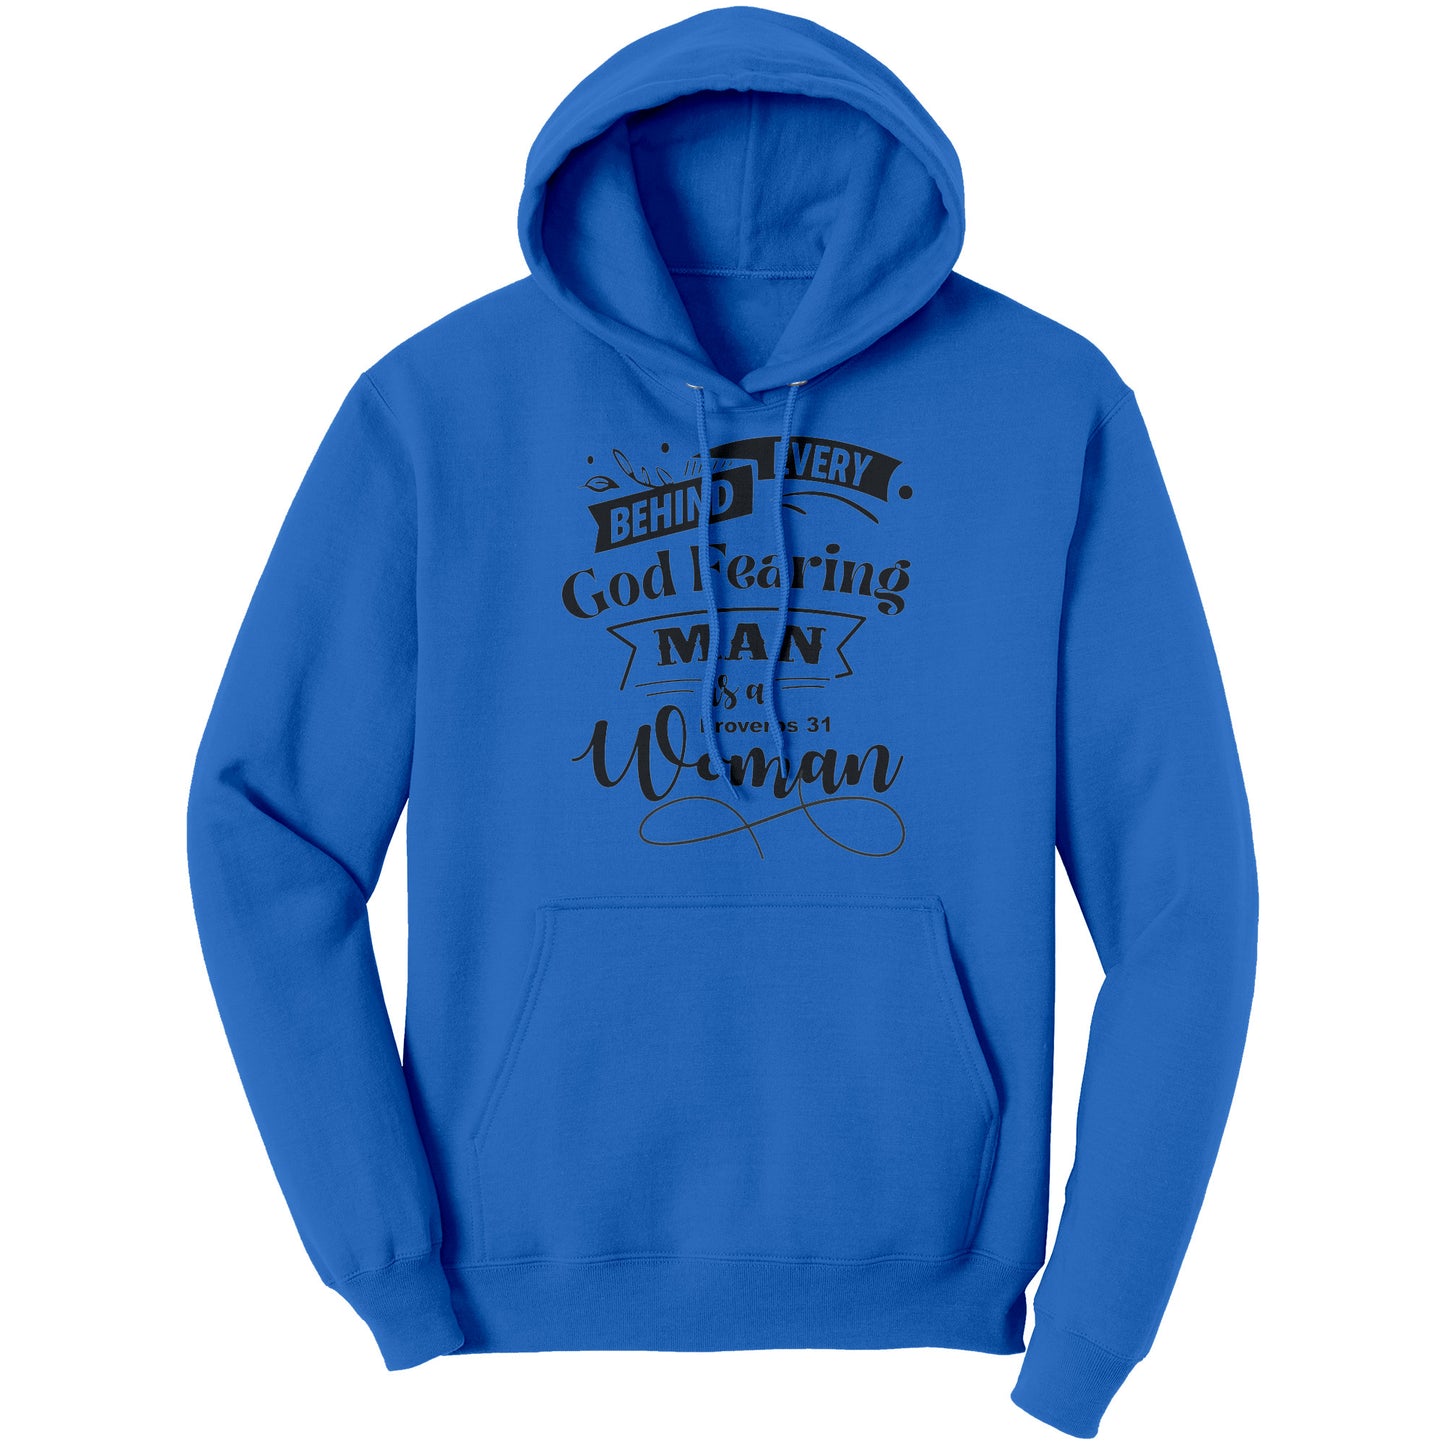 Behind Every God Fearing Man is a Proverbs 31 Woman Hoodie Part 1